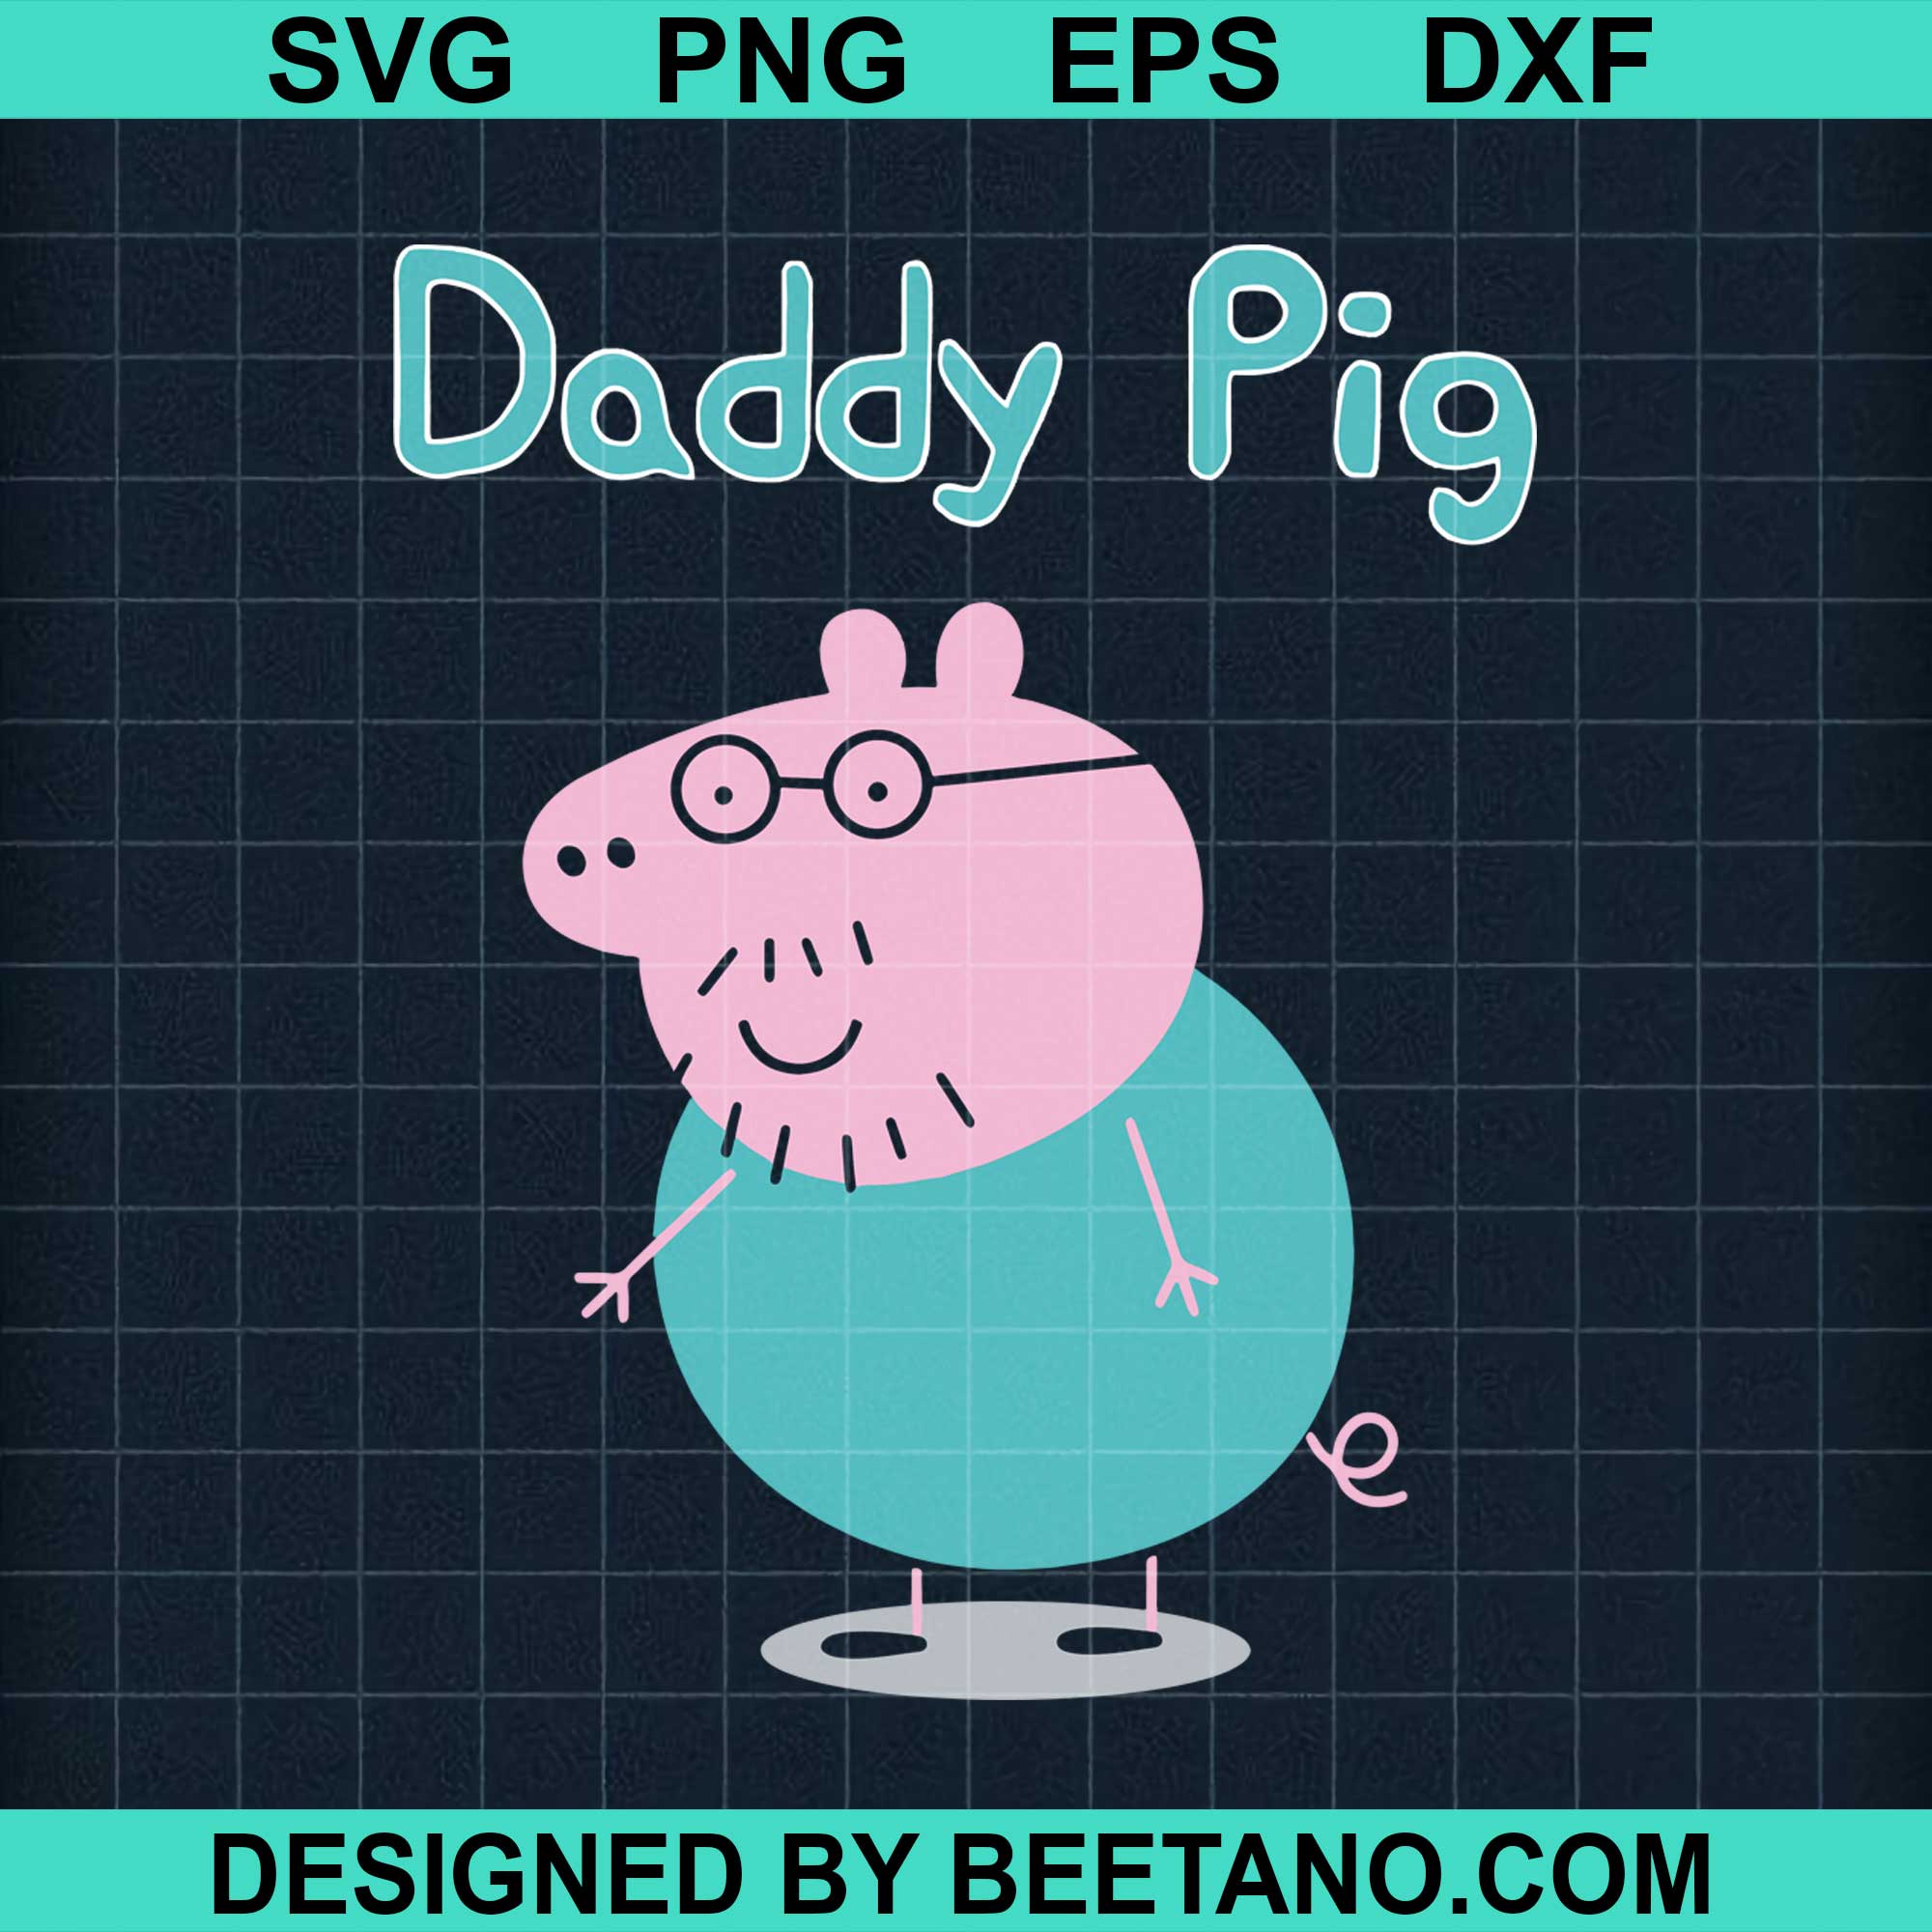 Download Peppa Pig Daddy Pig Svg Cut File For Cricut Silhouette Machine Make Cr Beetanosvg Scalable Vector Graphics